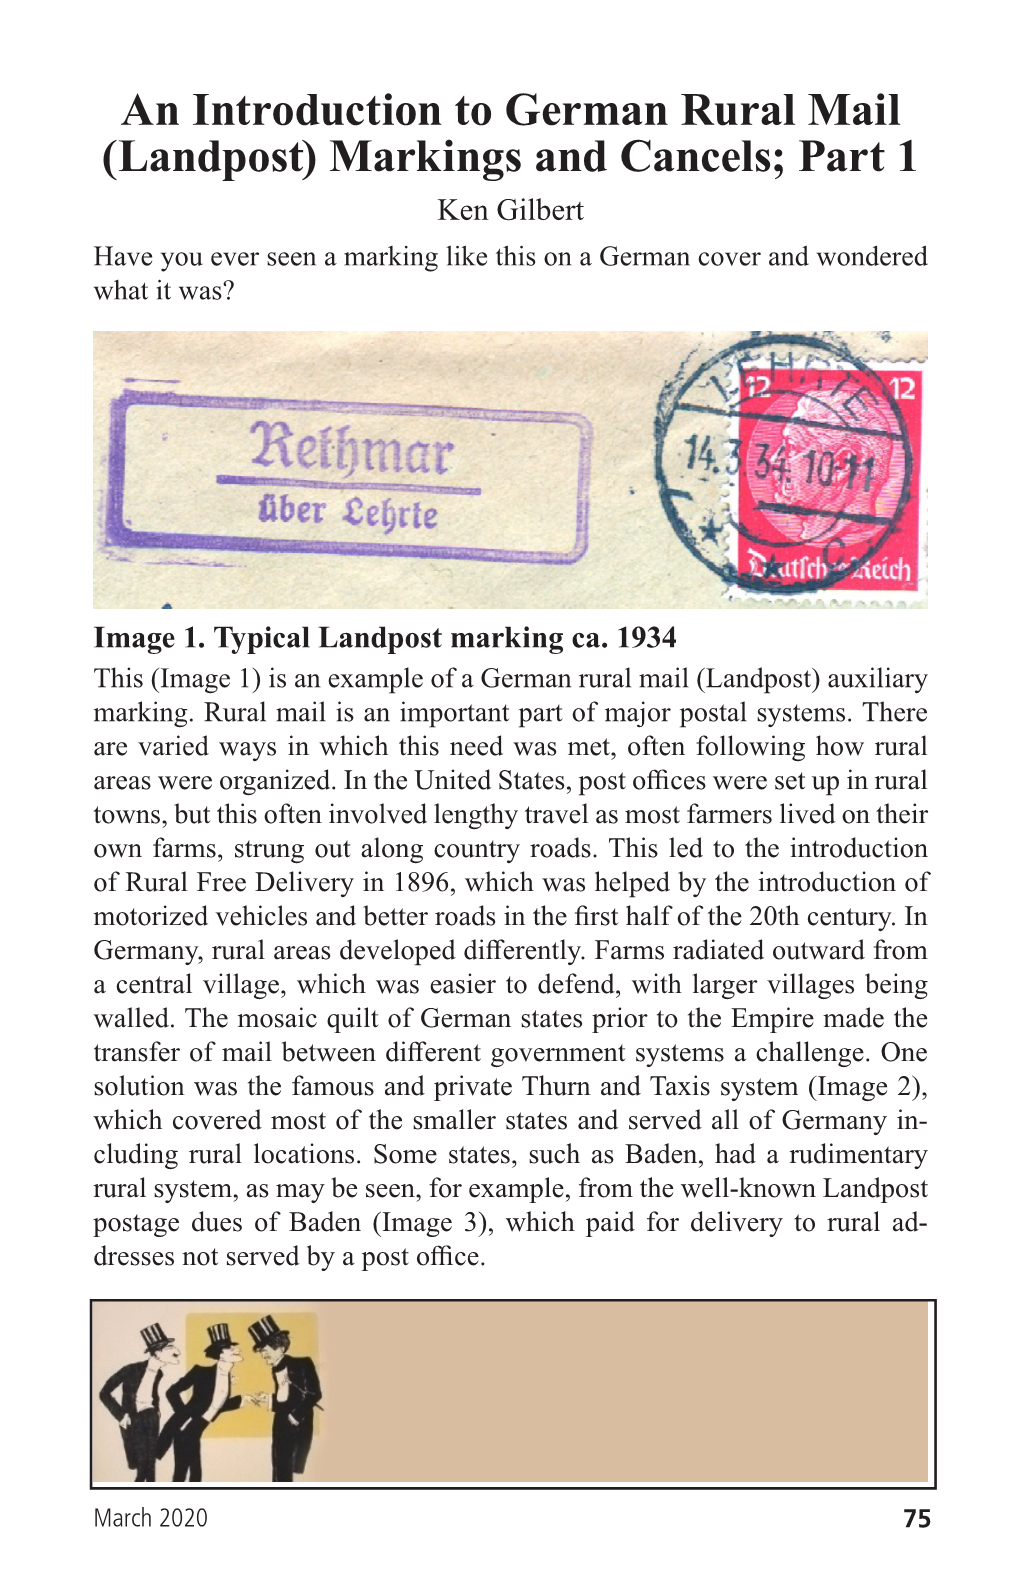 An Introduction to German Rural Mail (Landpost